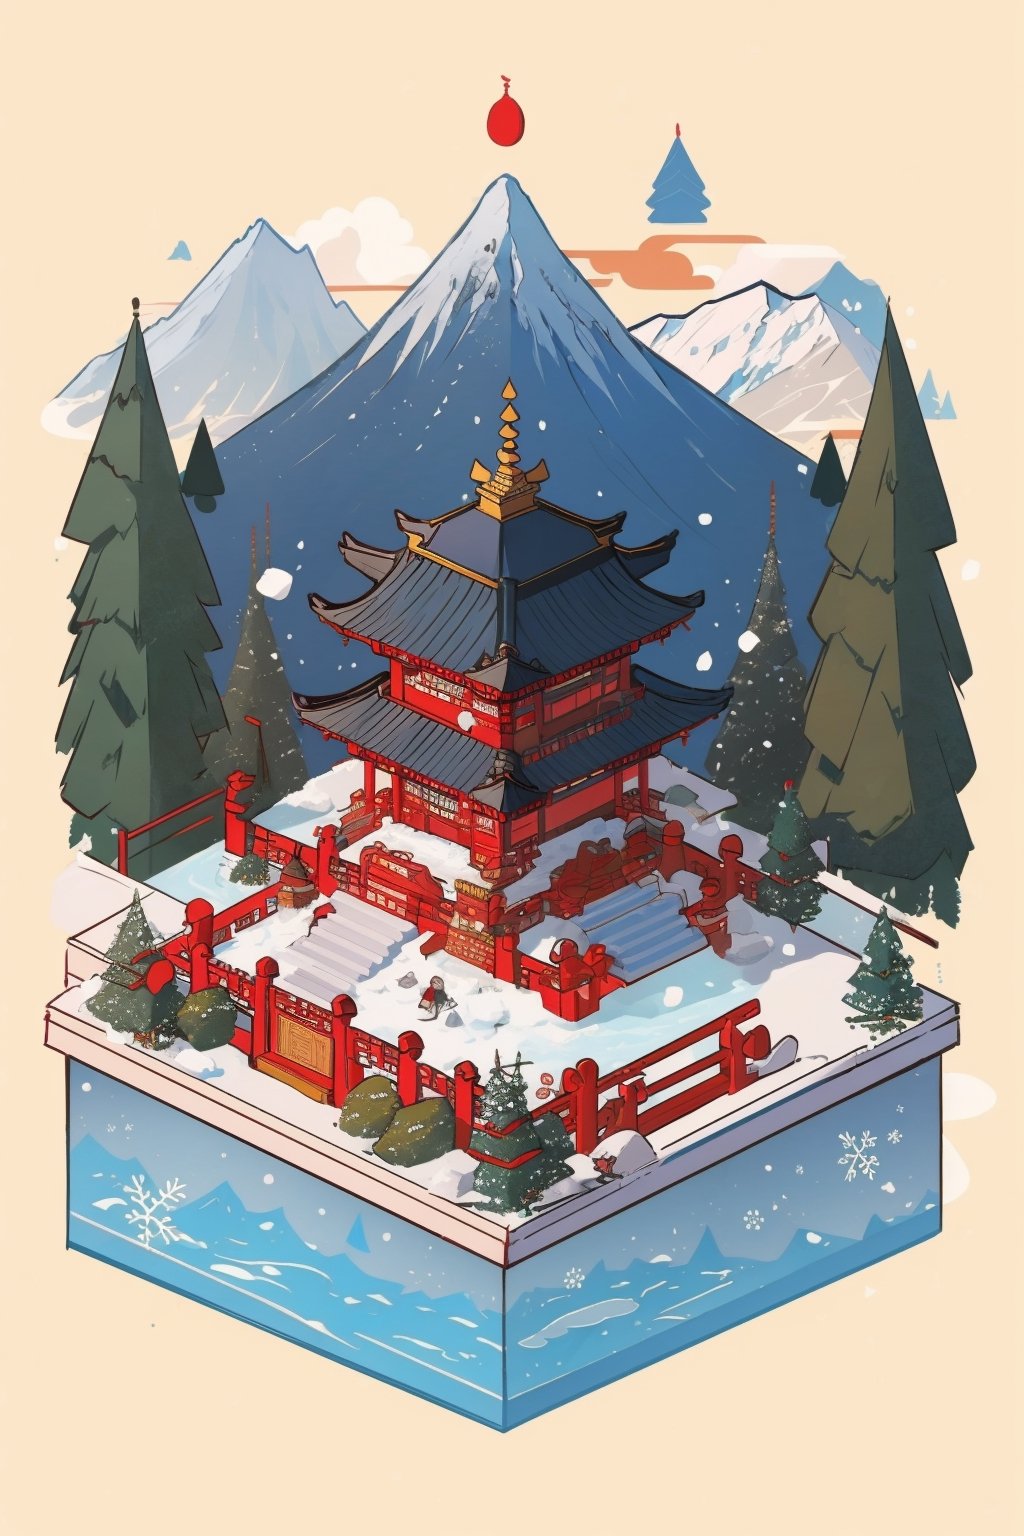 snow on pagoda, garden, architecture, isometric, winter, mountains, water, chinese, ancient, trees